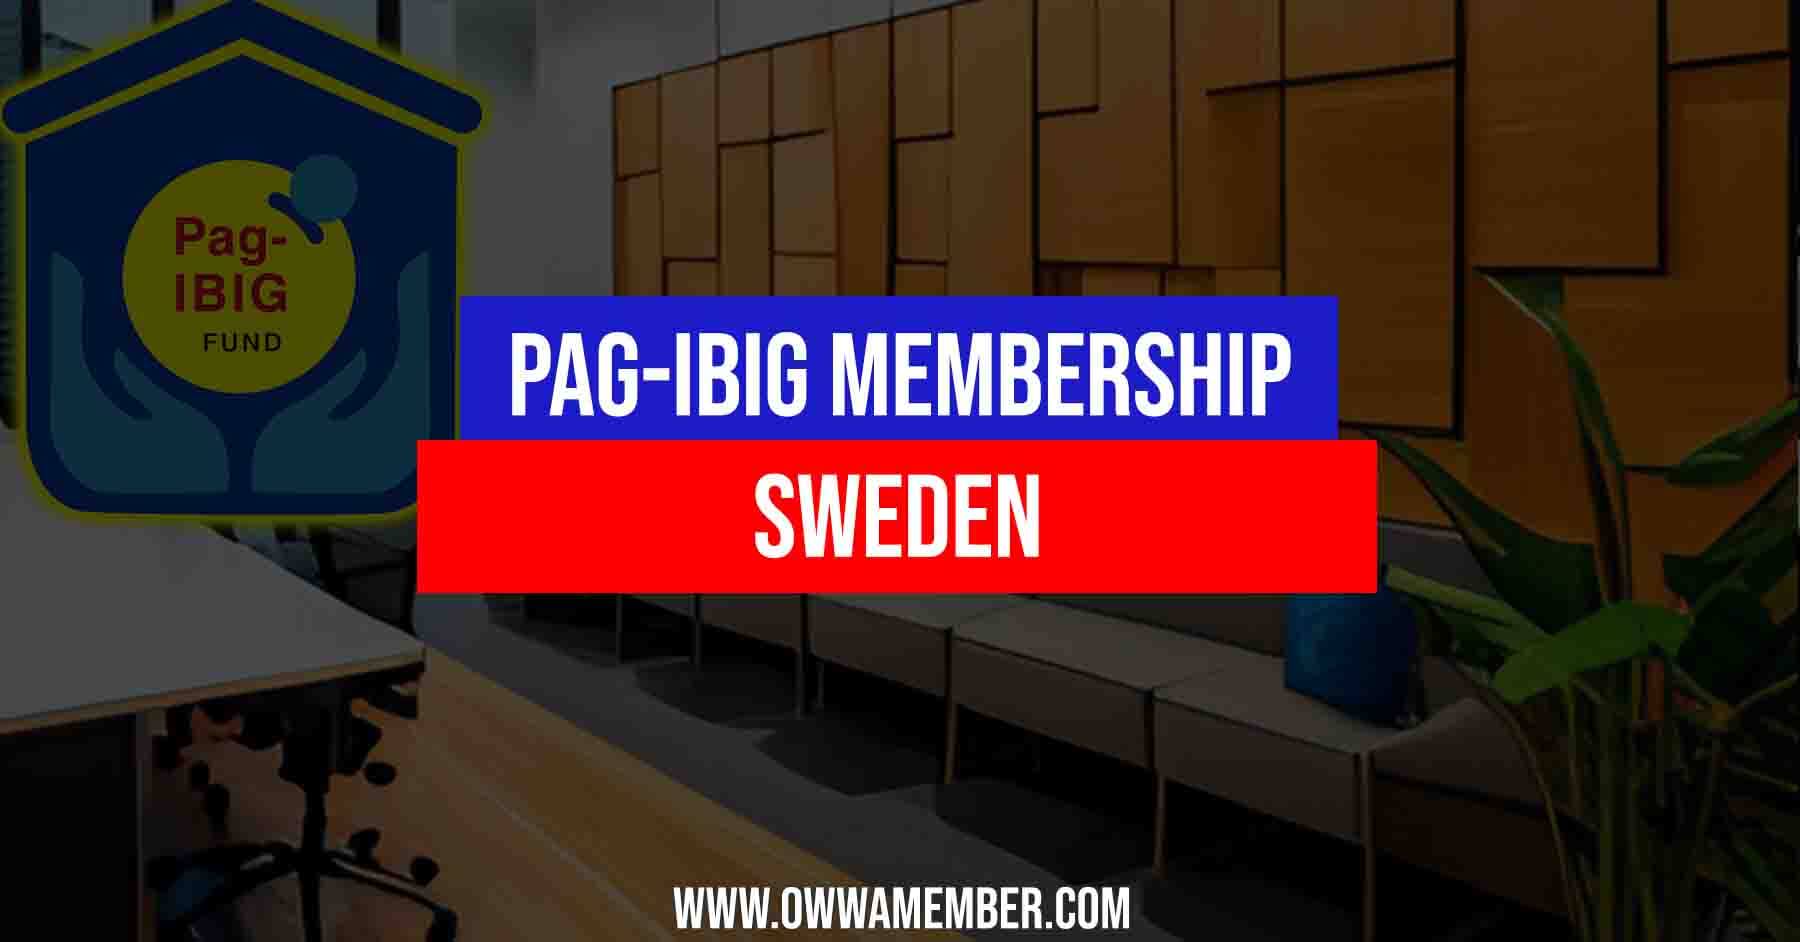 how to apply pagibig membership in sweden